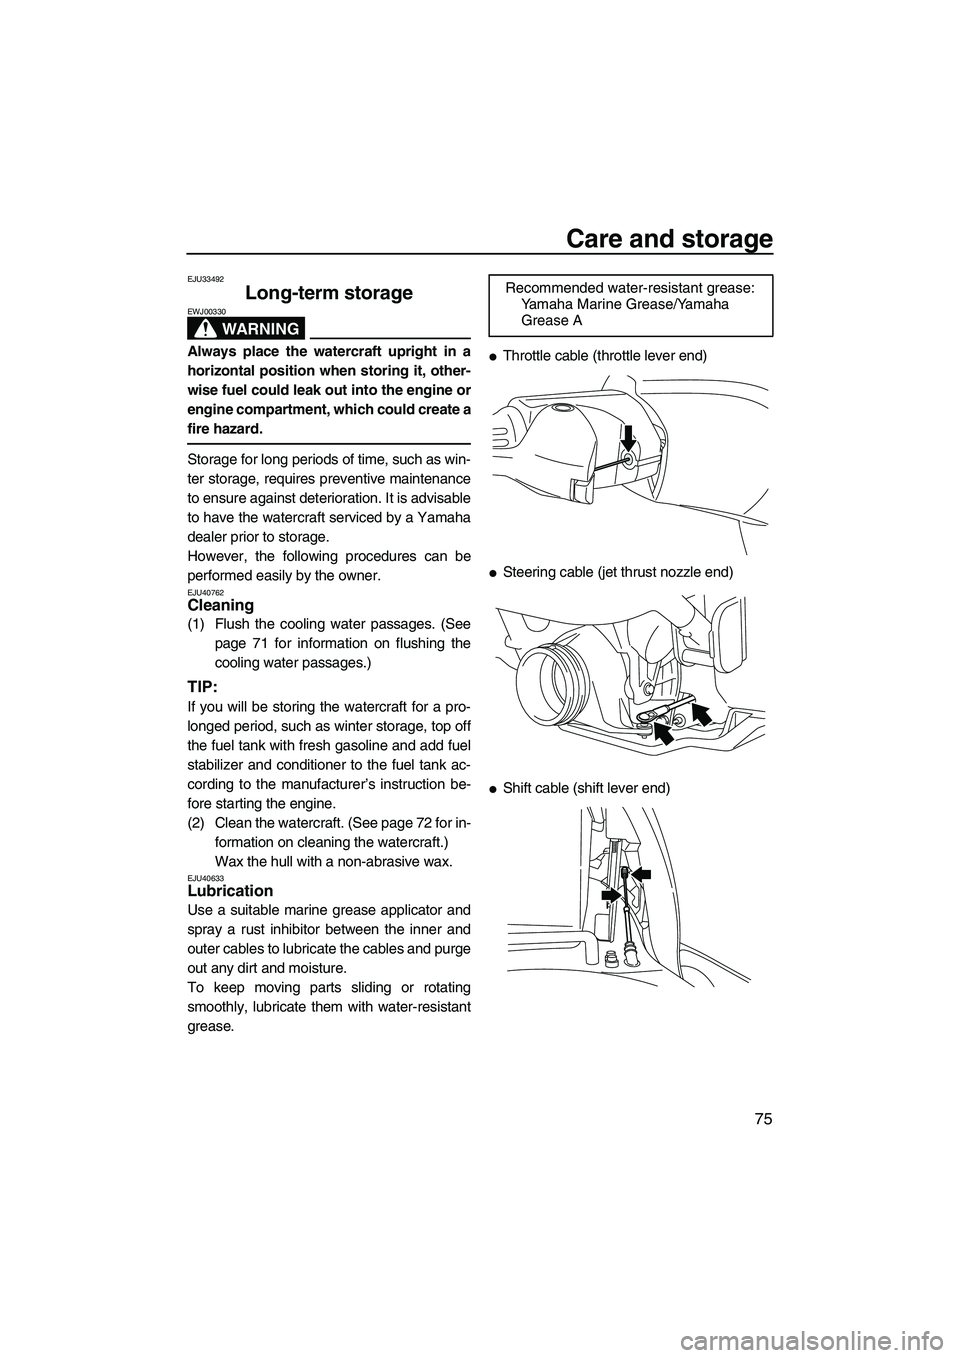 YAMAHA VXS 2012  Owners Manual Care and storage
75
EJU33492
Long-term storage 
WARNING
EWJ00330
Always place the watercraft upright in a
horizontal position when storing it, other-
wise fuel could leak out into the engine or
engine